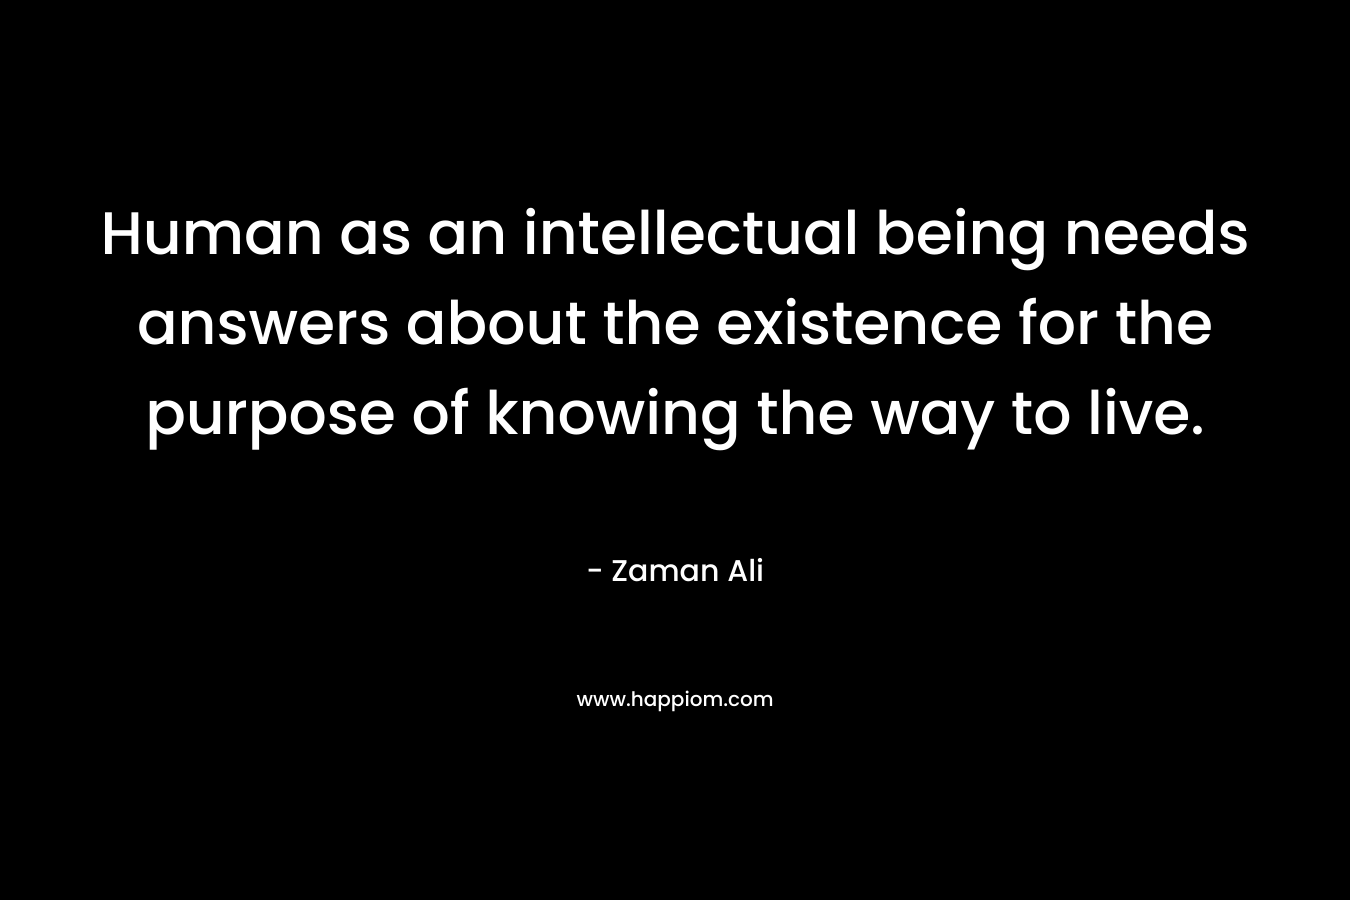 Human as an intellectual being needs answers about the existence for the purpose of knowing the way to live. – Zaman Ali